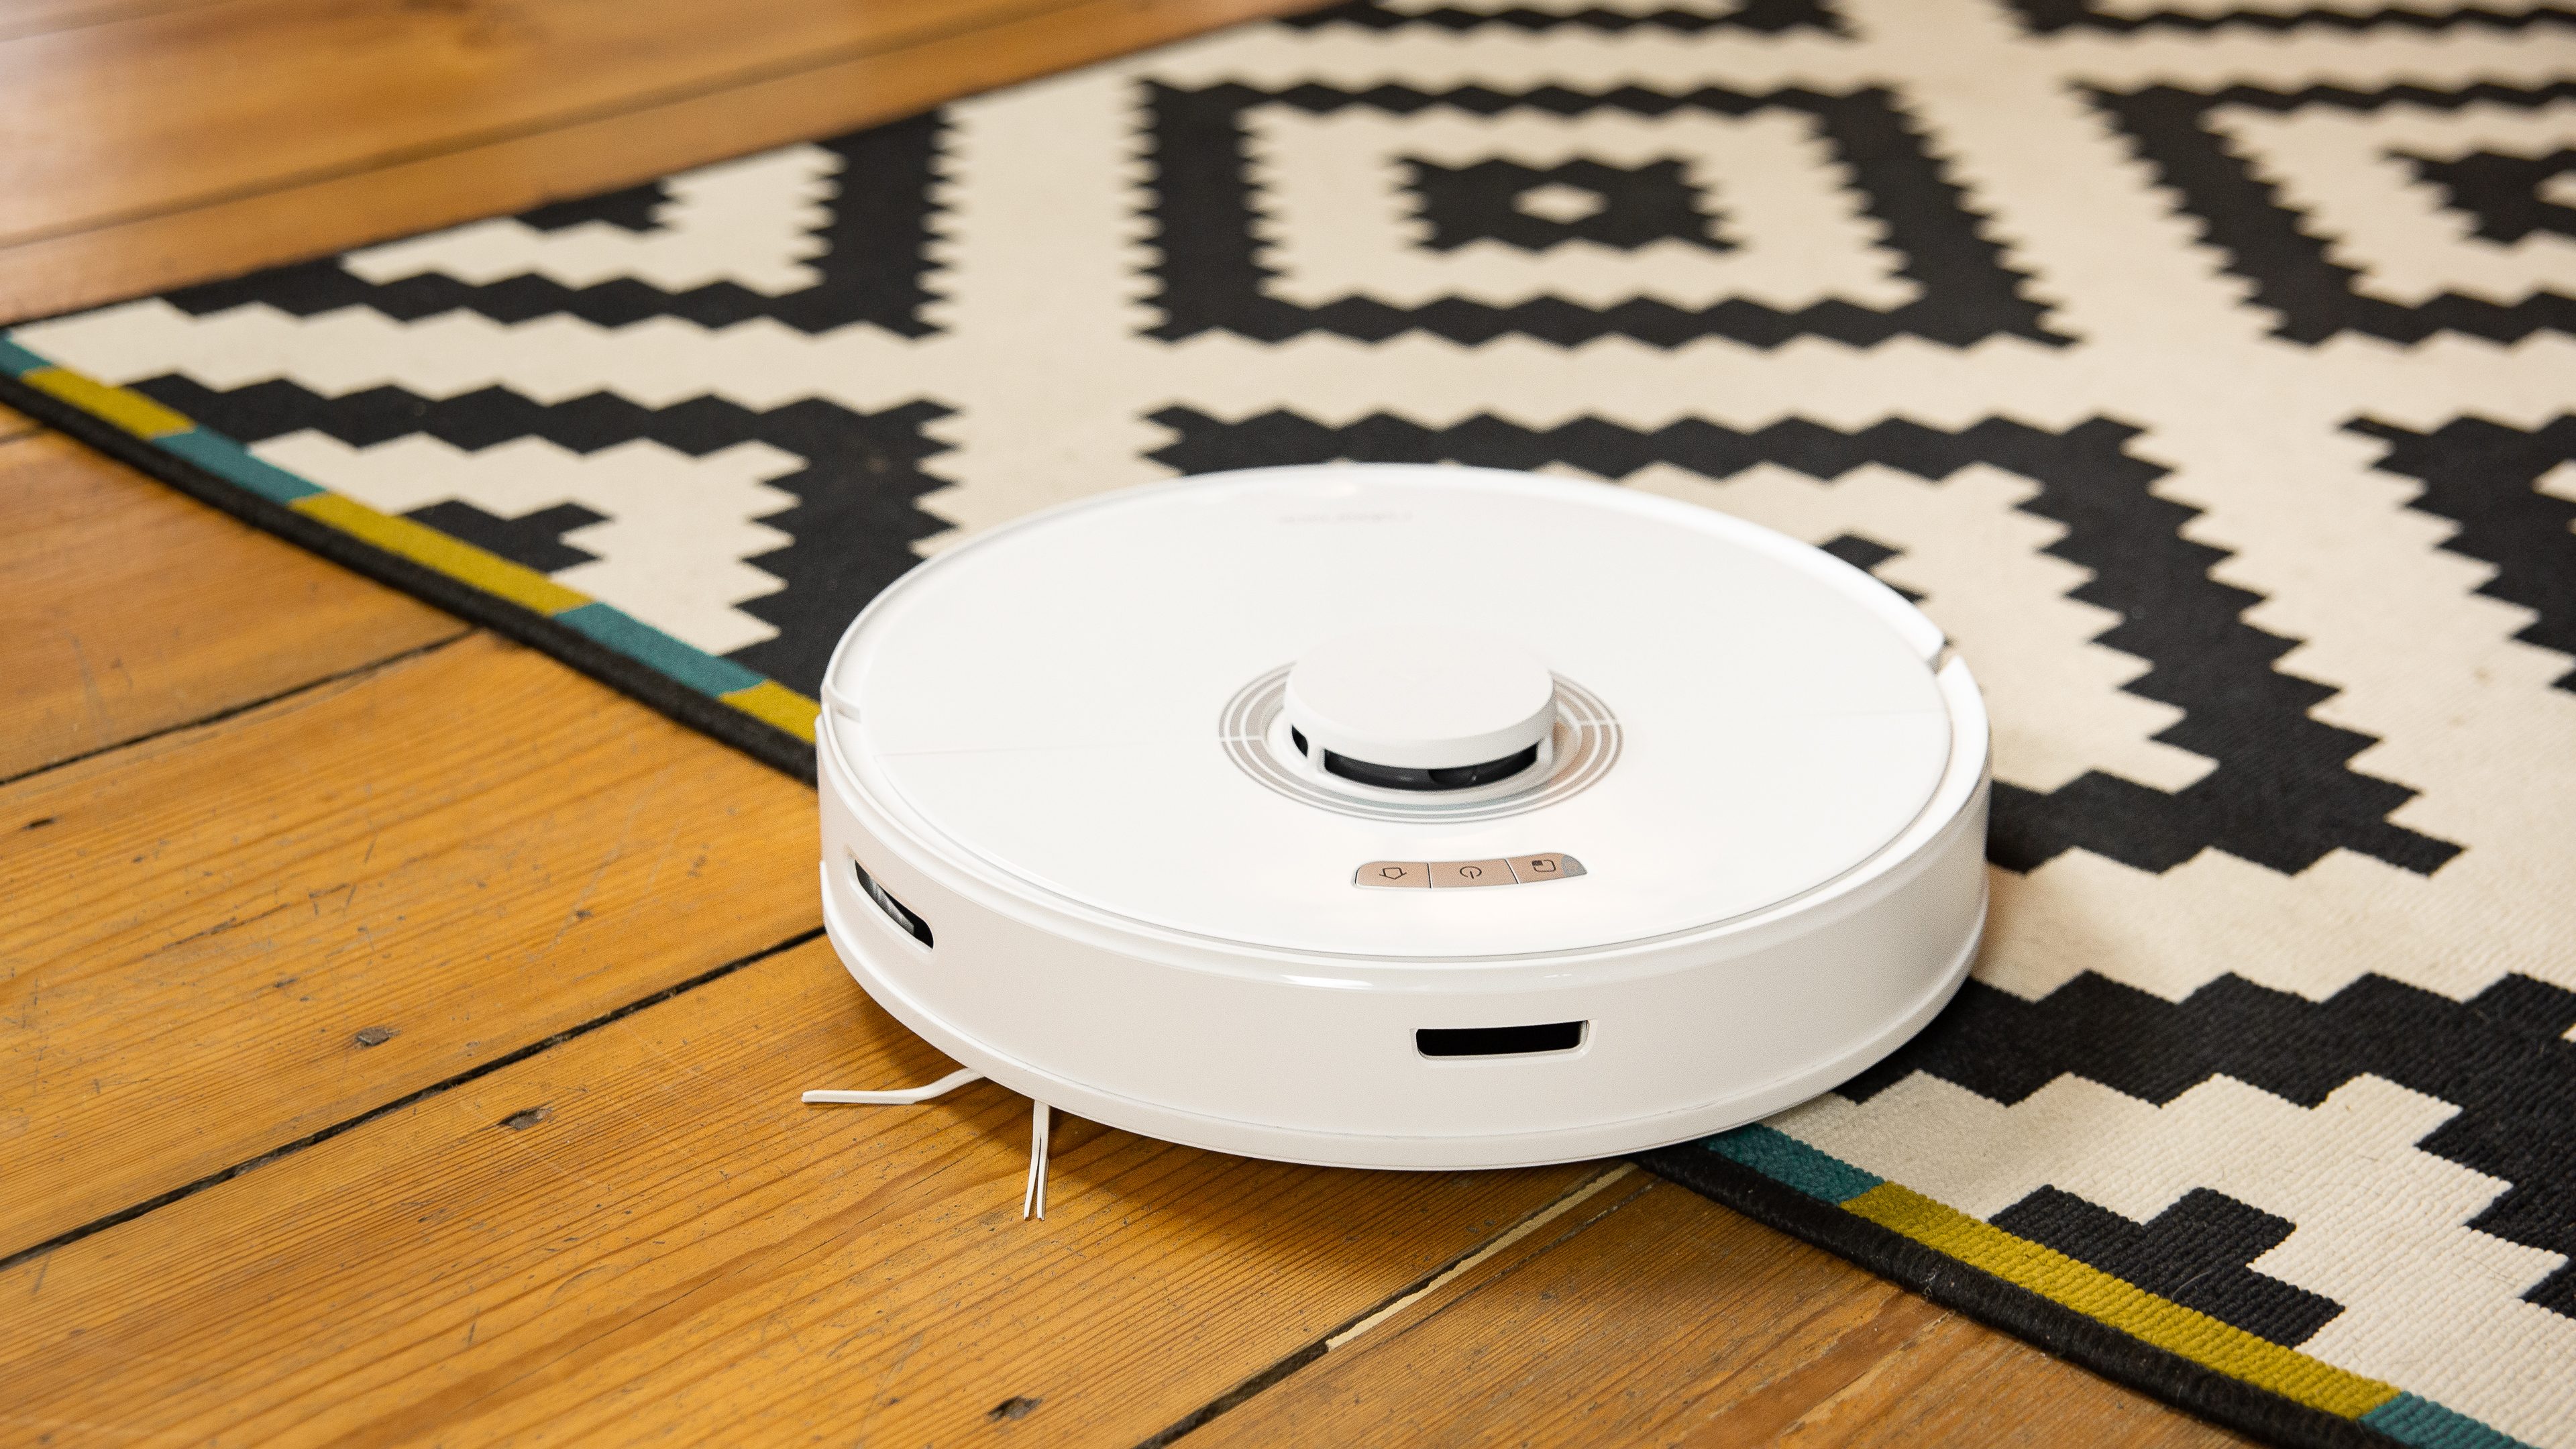 Roborock Q7 Max robot vacuum cleaner in review: High suction power